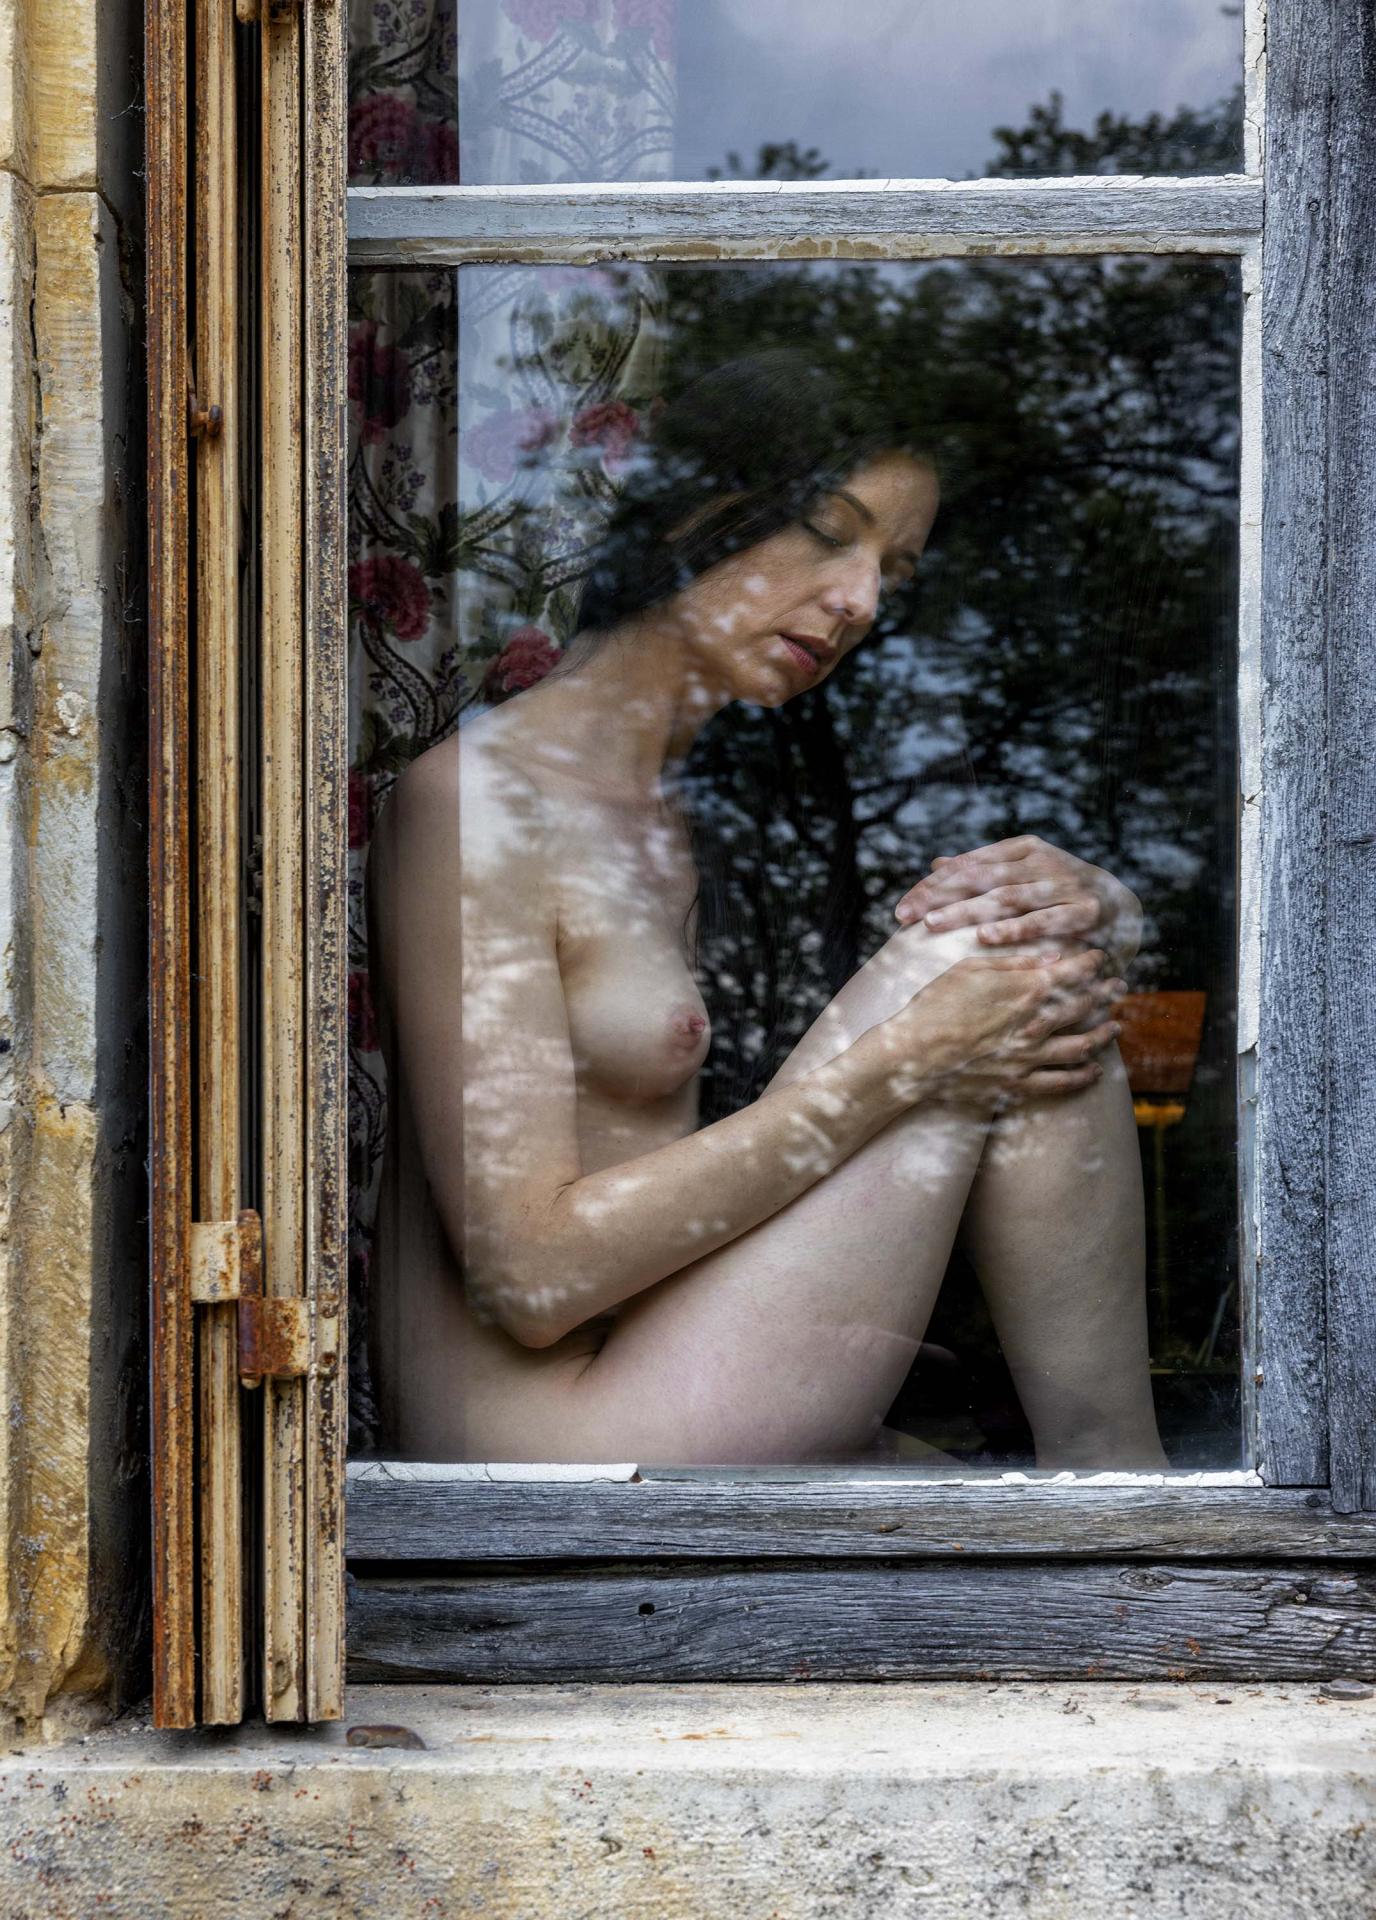 New York Photography Awards Winner - The dreaming Girl behind the window